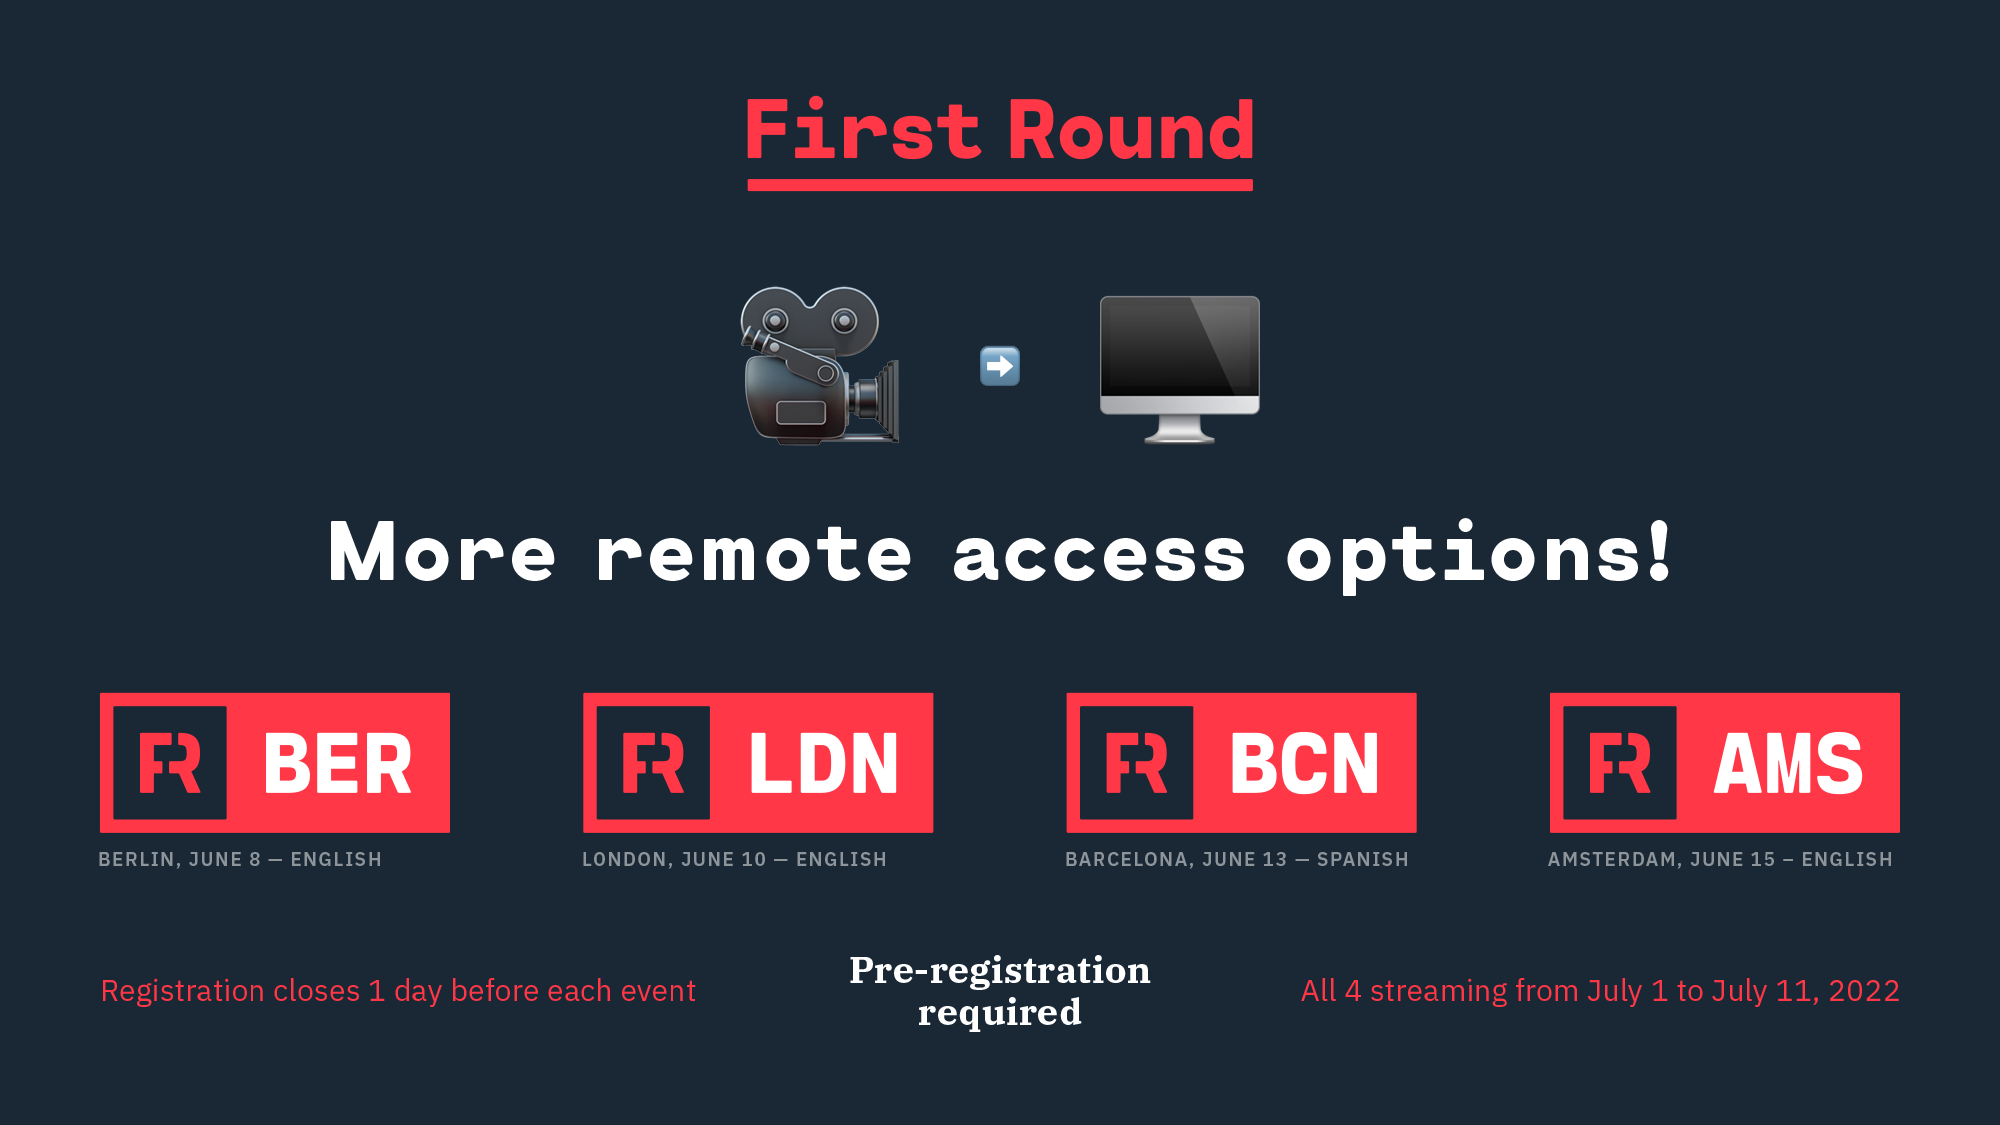 First Round: More Remote Access Options